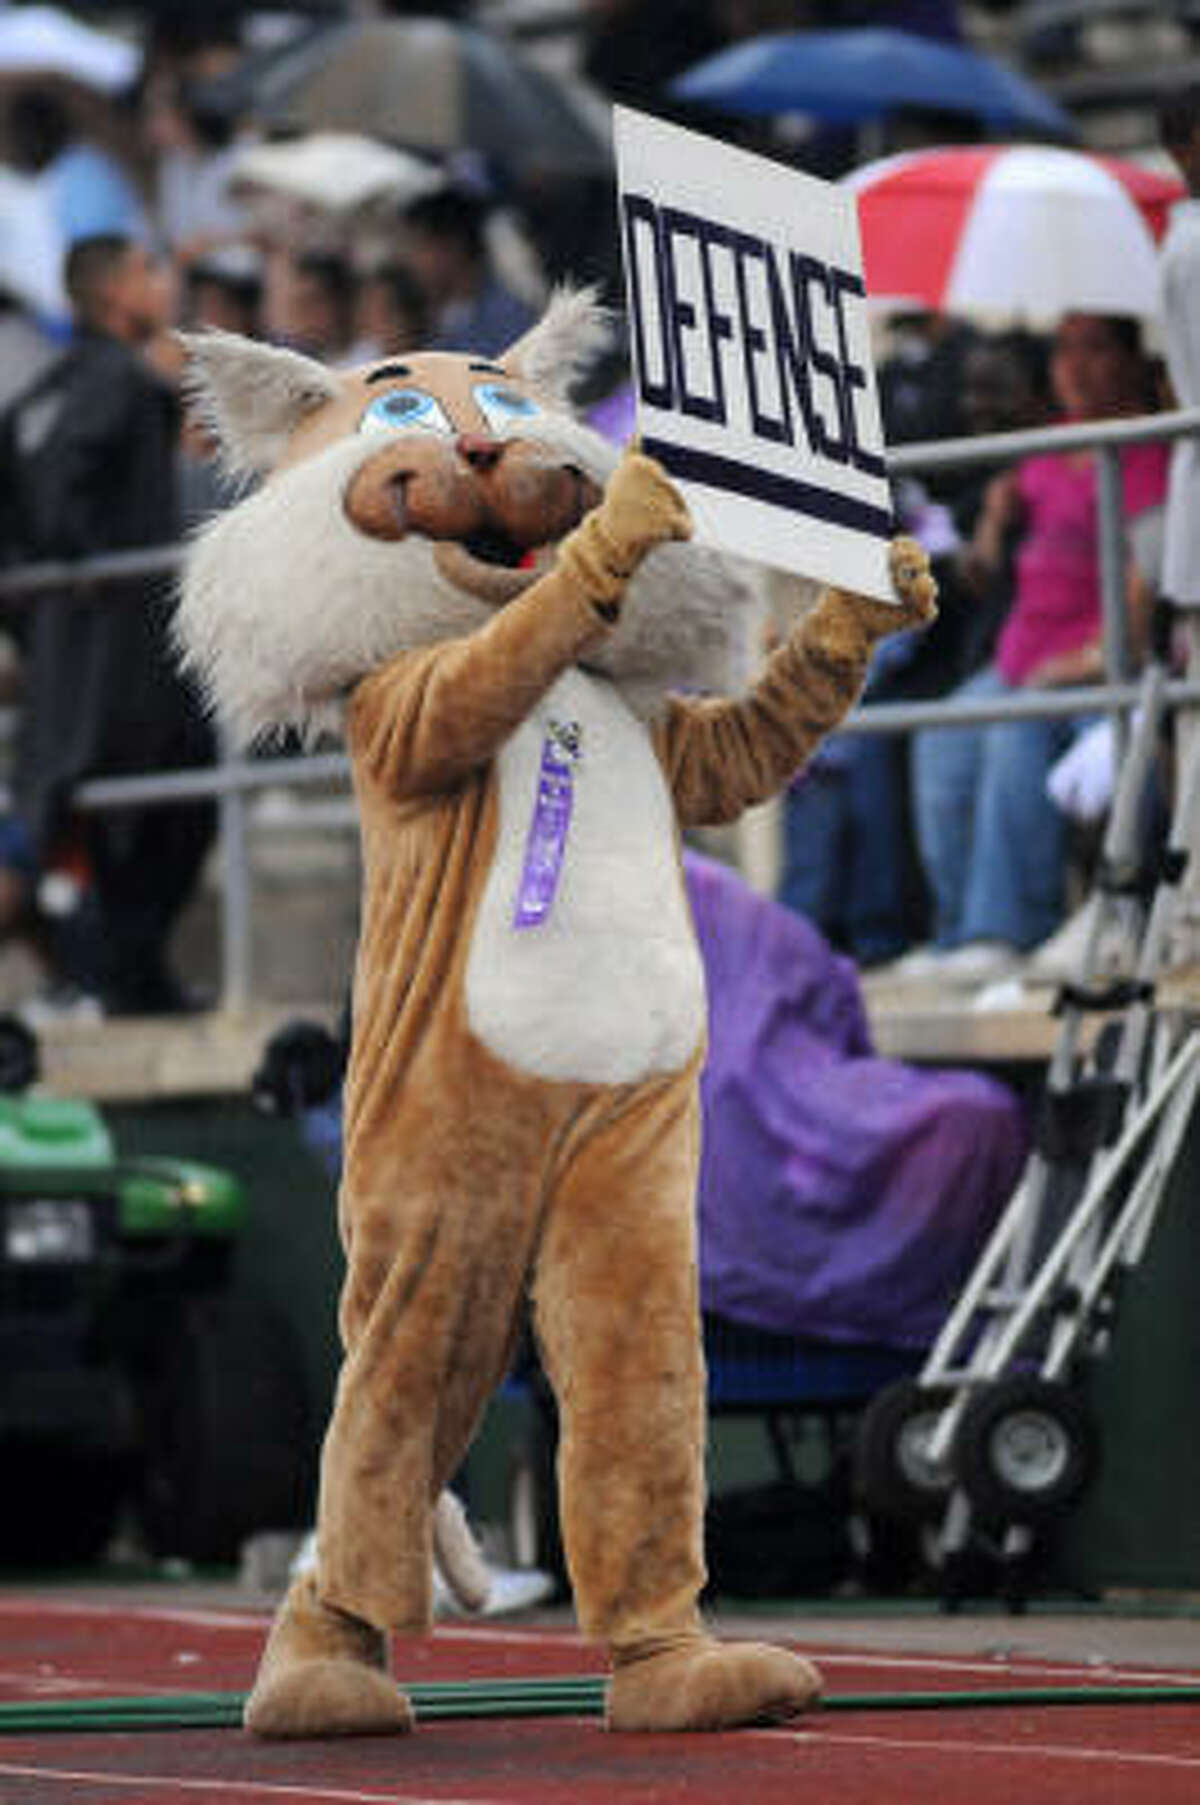 "Willie the Wildcat," who in real life is Trey Legall, calls for defense.